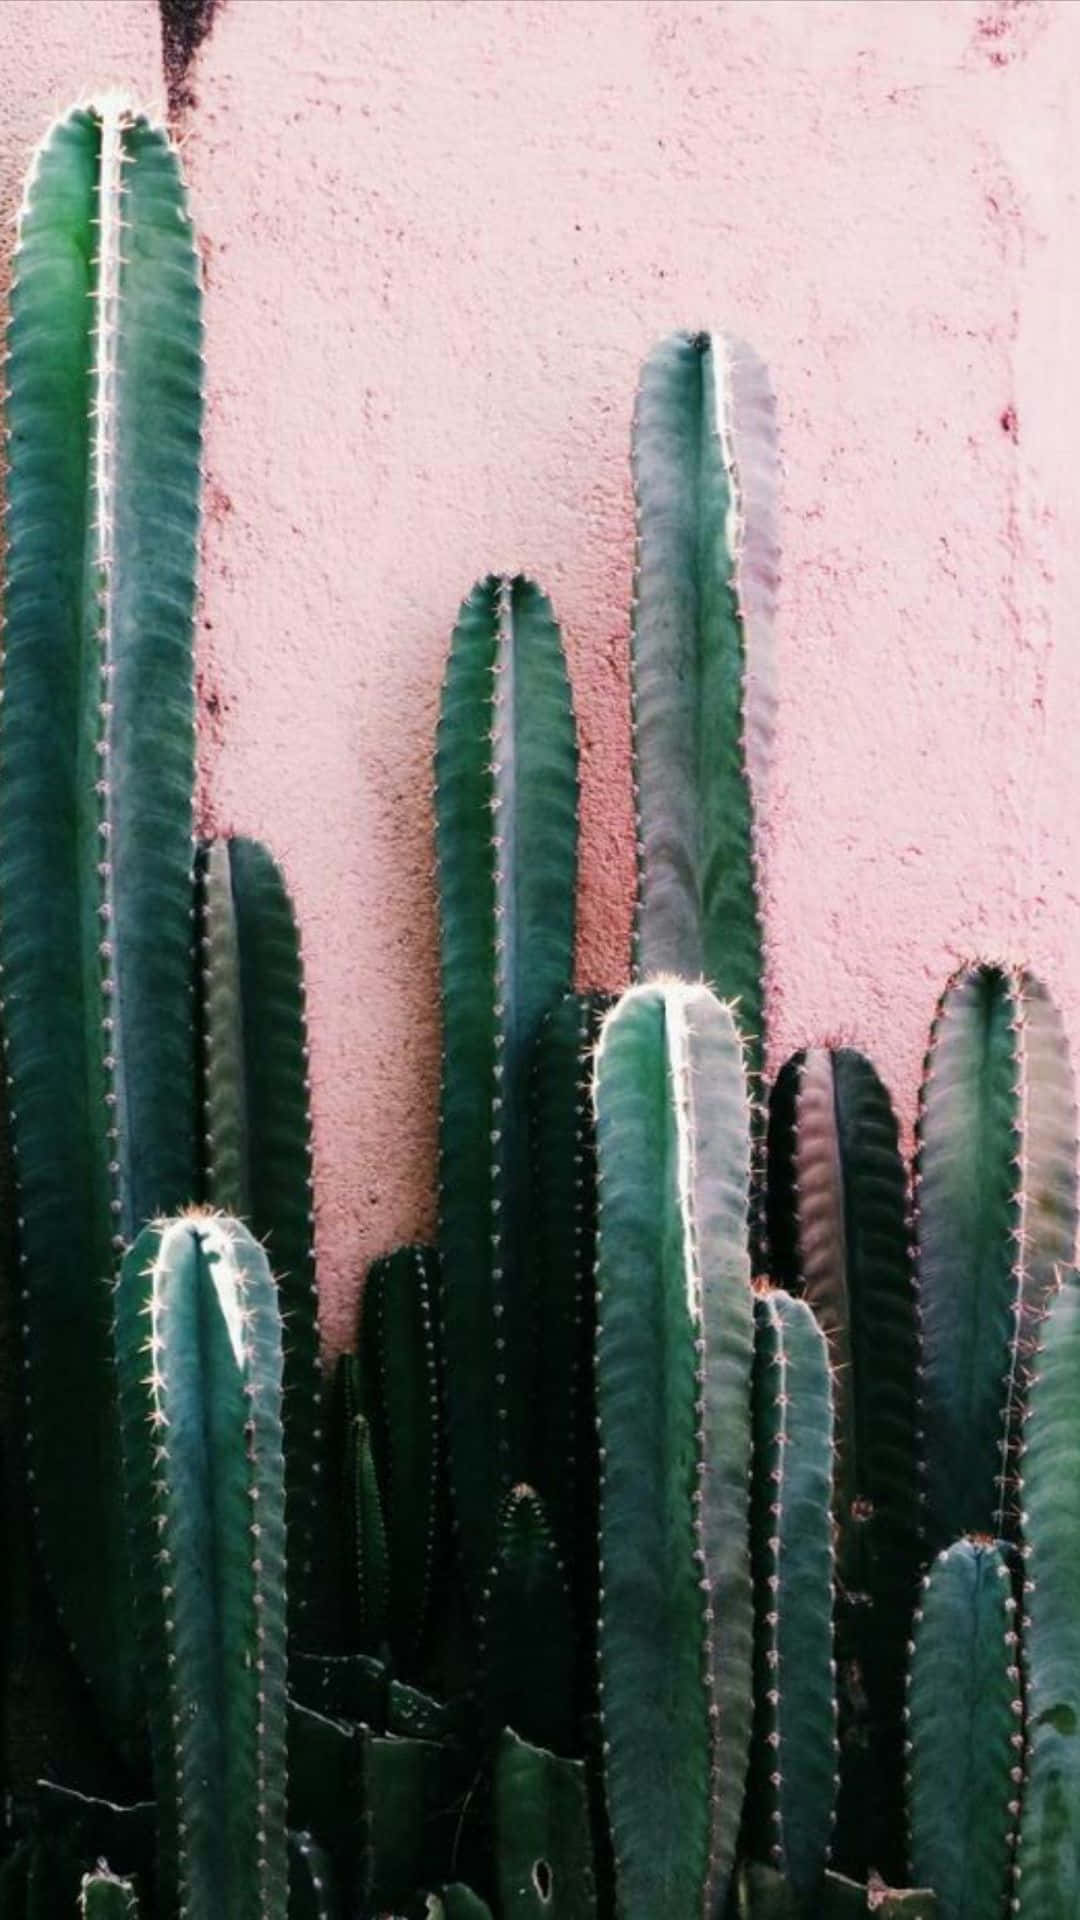 Get your hands on the vibrant Cactus Iphone today! Wallpaper